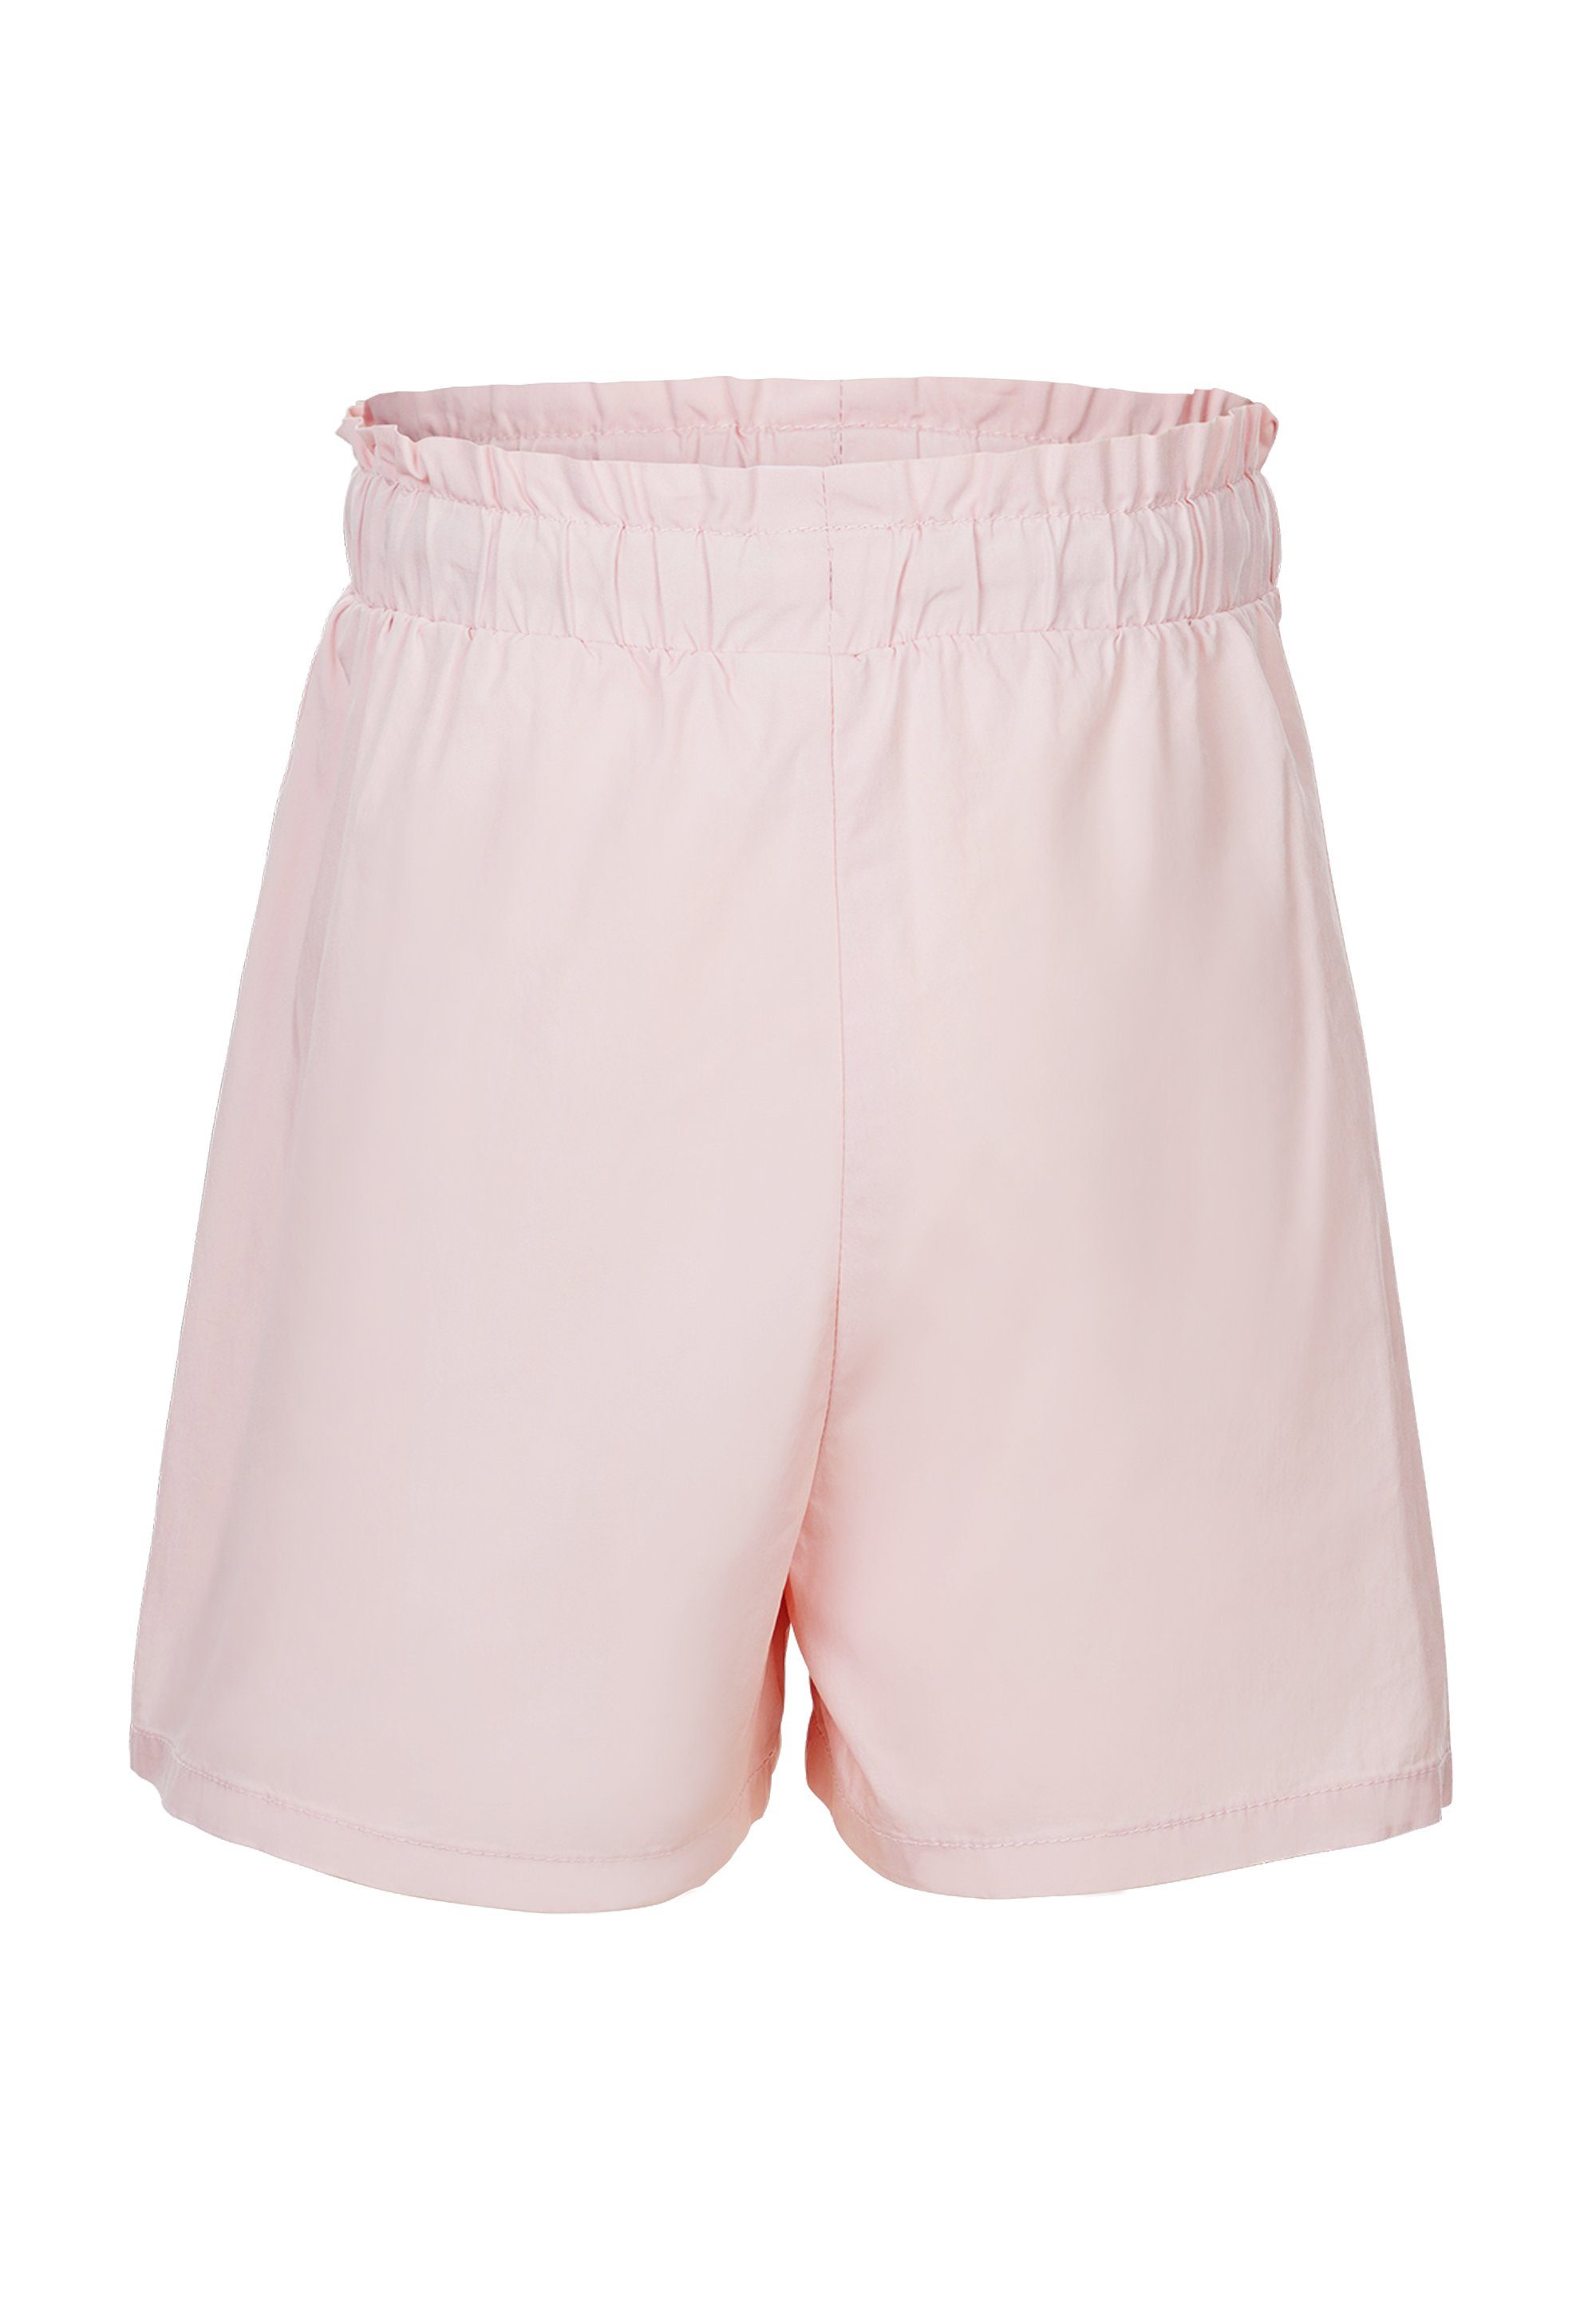 junior Cool-Touch-Funktion GIORDANO Motion G mit Shorts